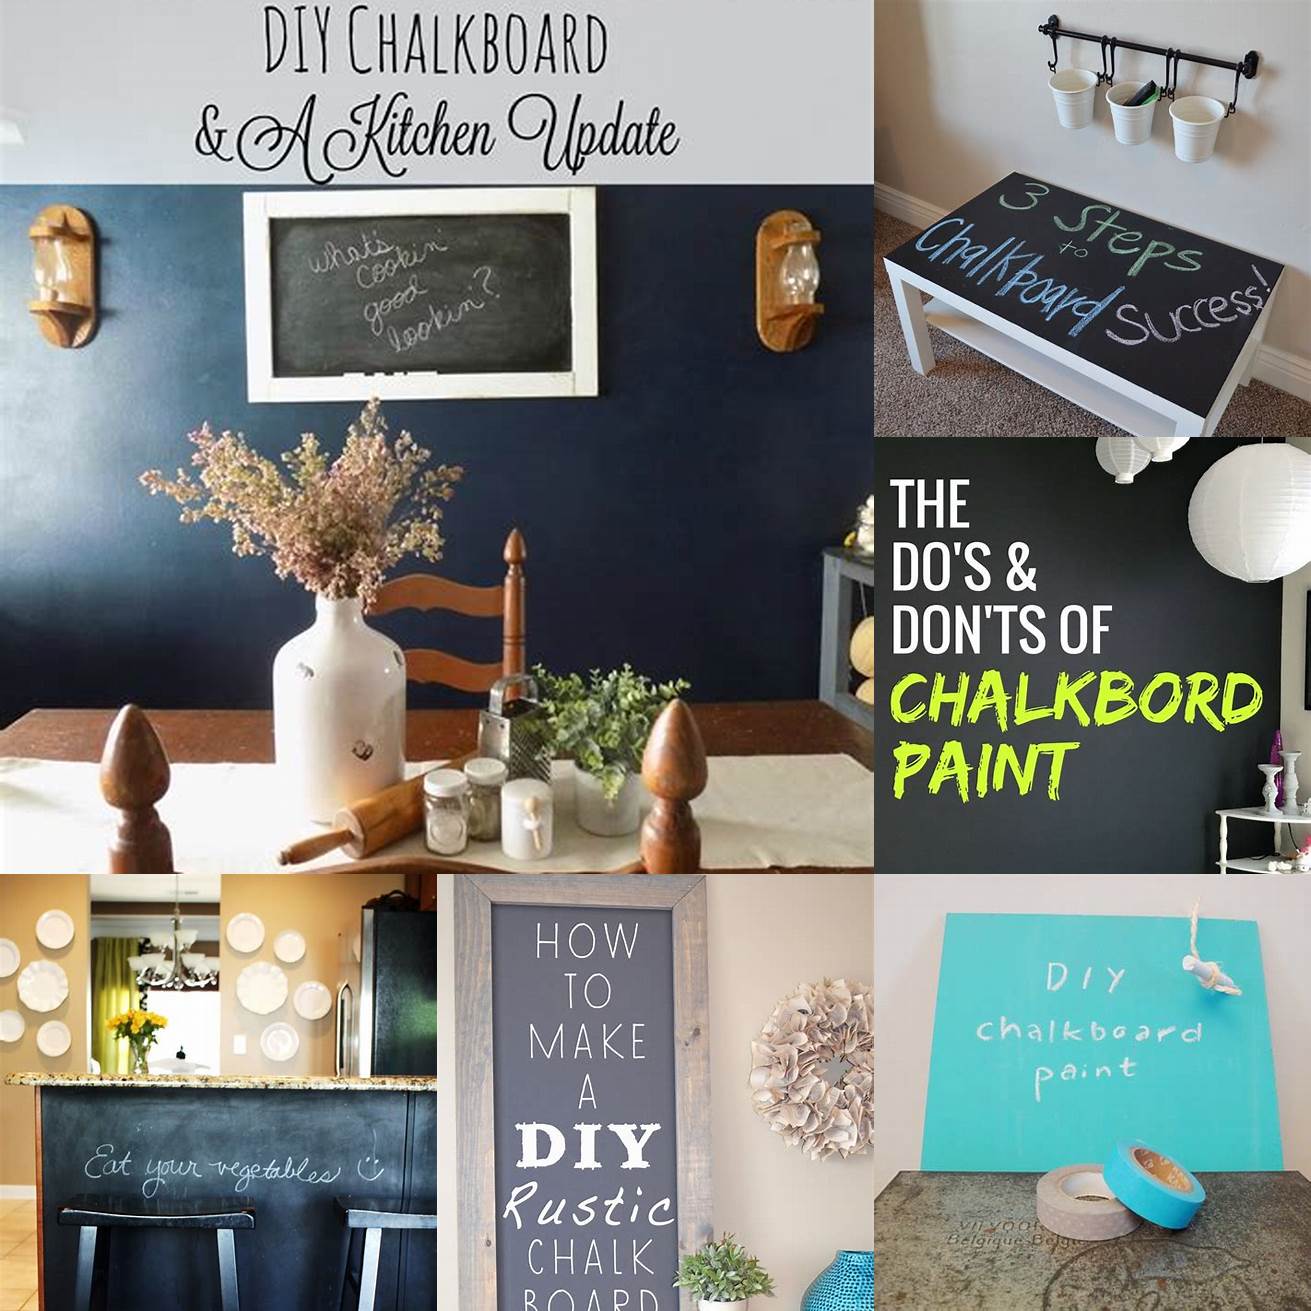 3 DIY Chalkboard paint can be used to create a DIY version of a kitchen chalkboard on any surface This allows for more customization in terms of size and design